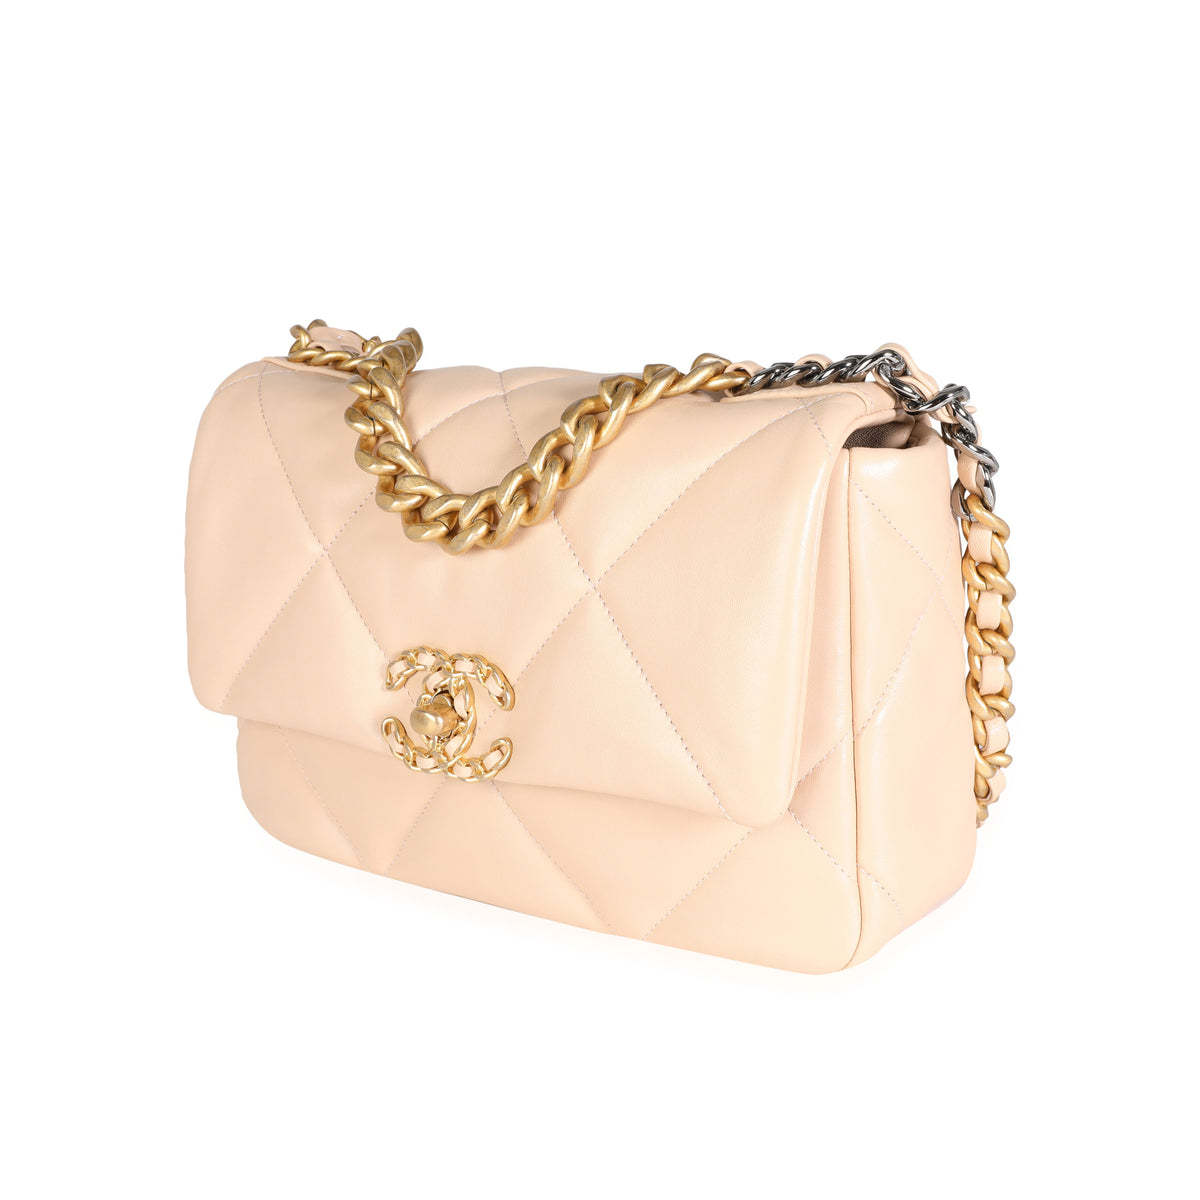 Chanel Beige Quilted Lambskin Chanel 19 Medium Flap Bag